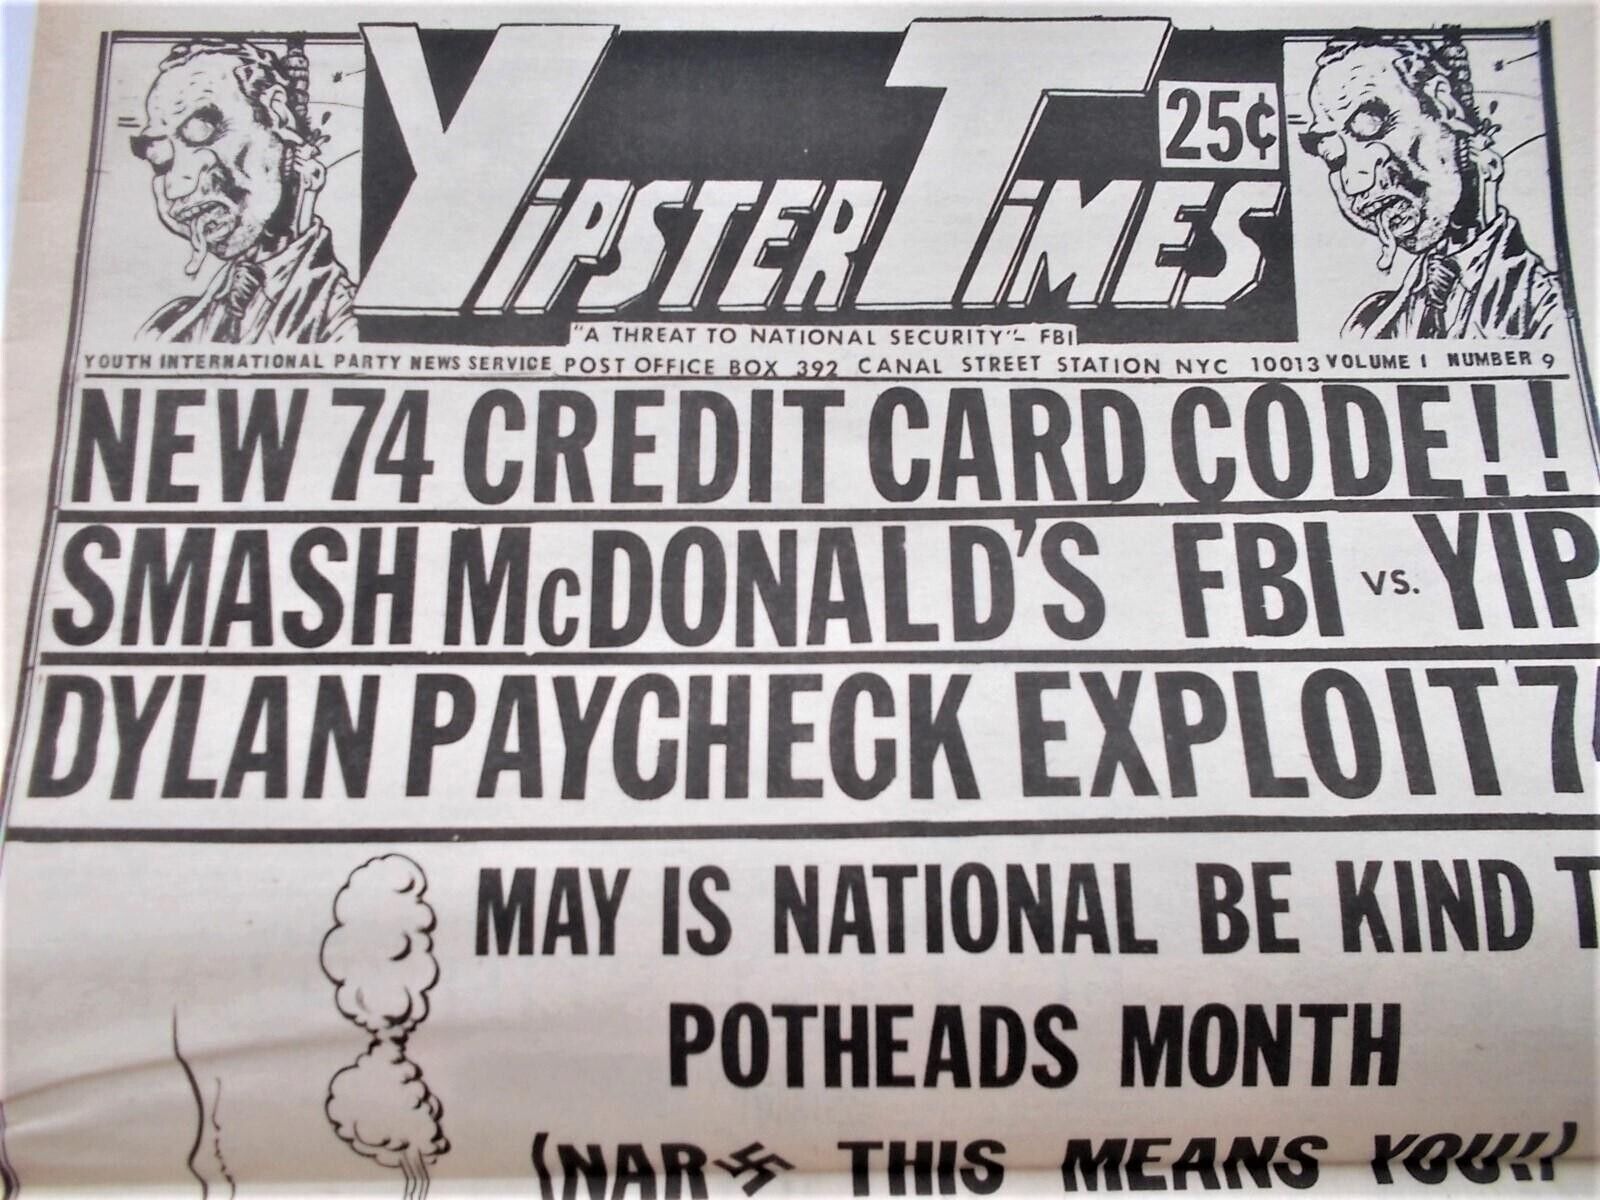 Yipster Times 1#9 March 1974 Underground Newspaper Bob Dylan JFK Conspiracy